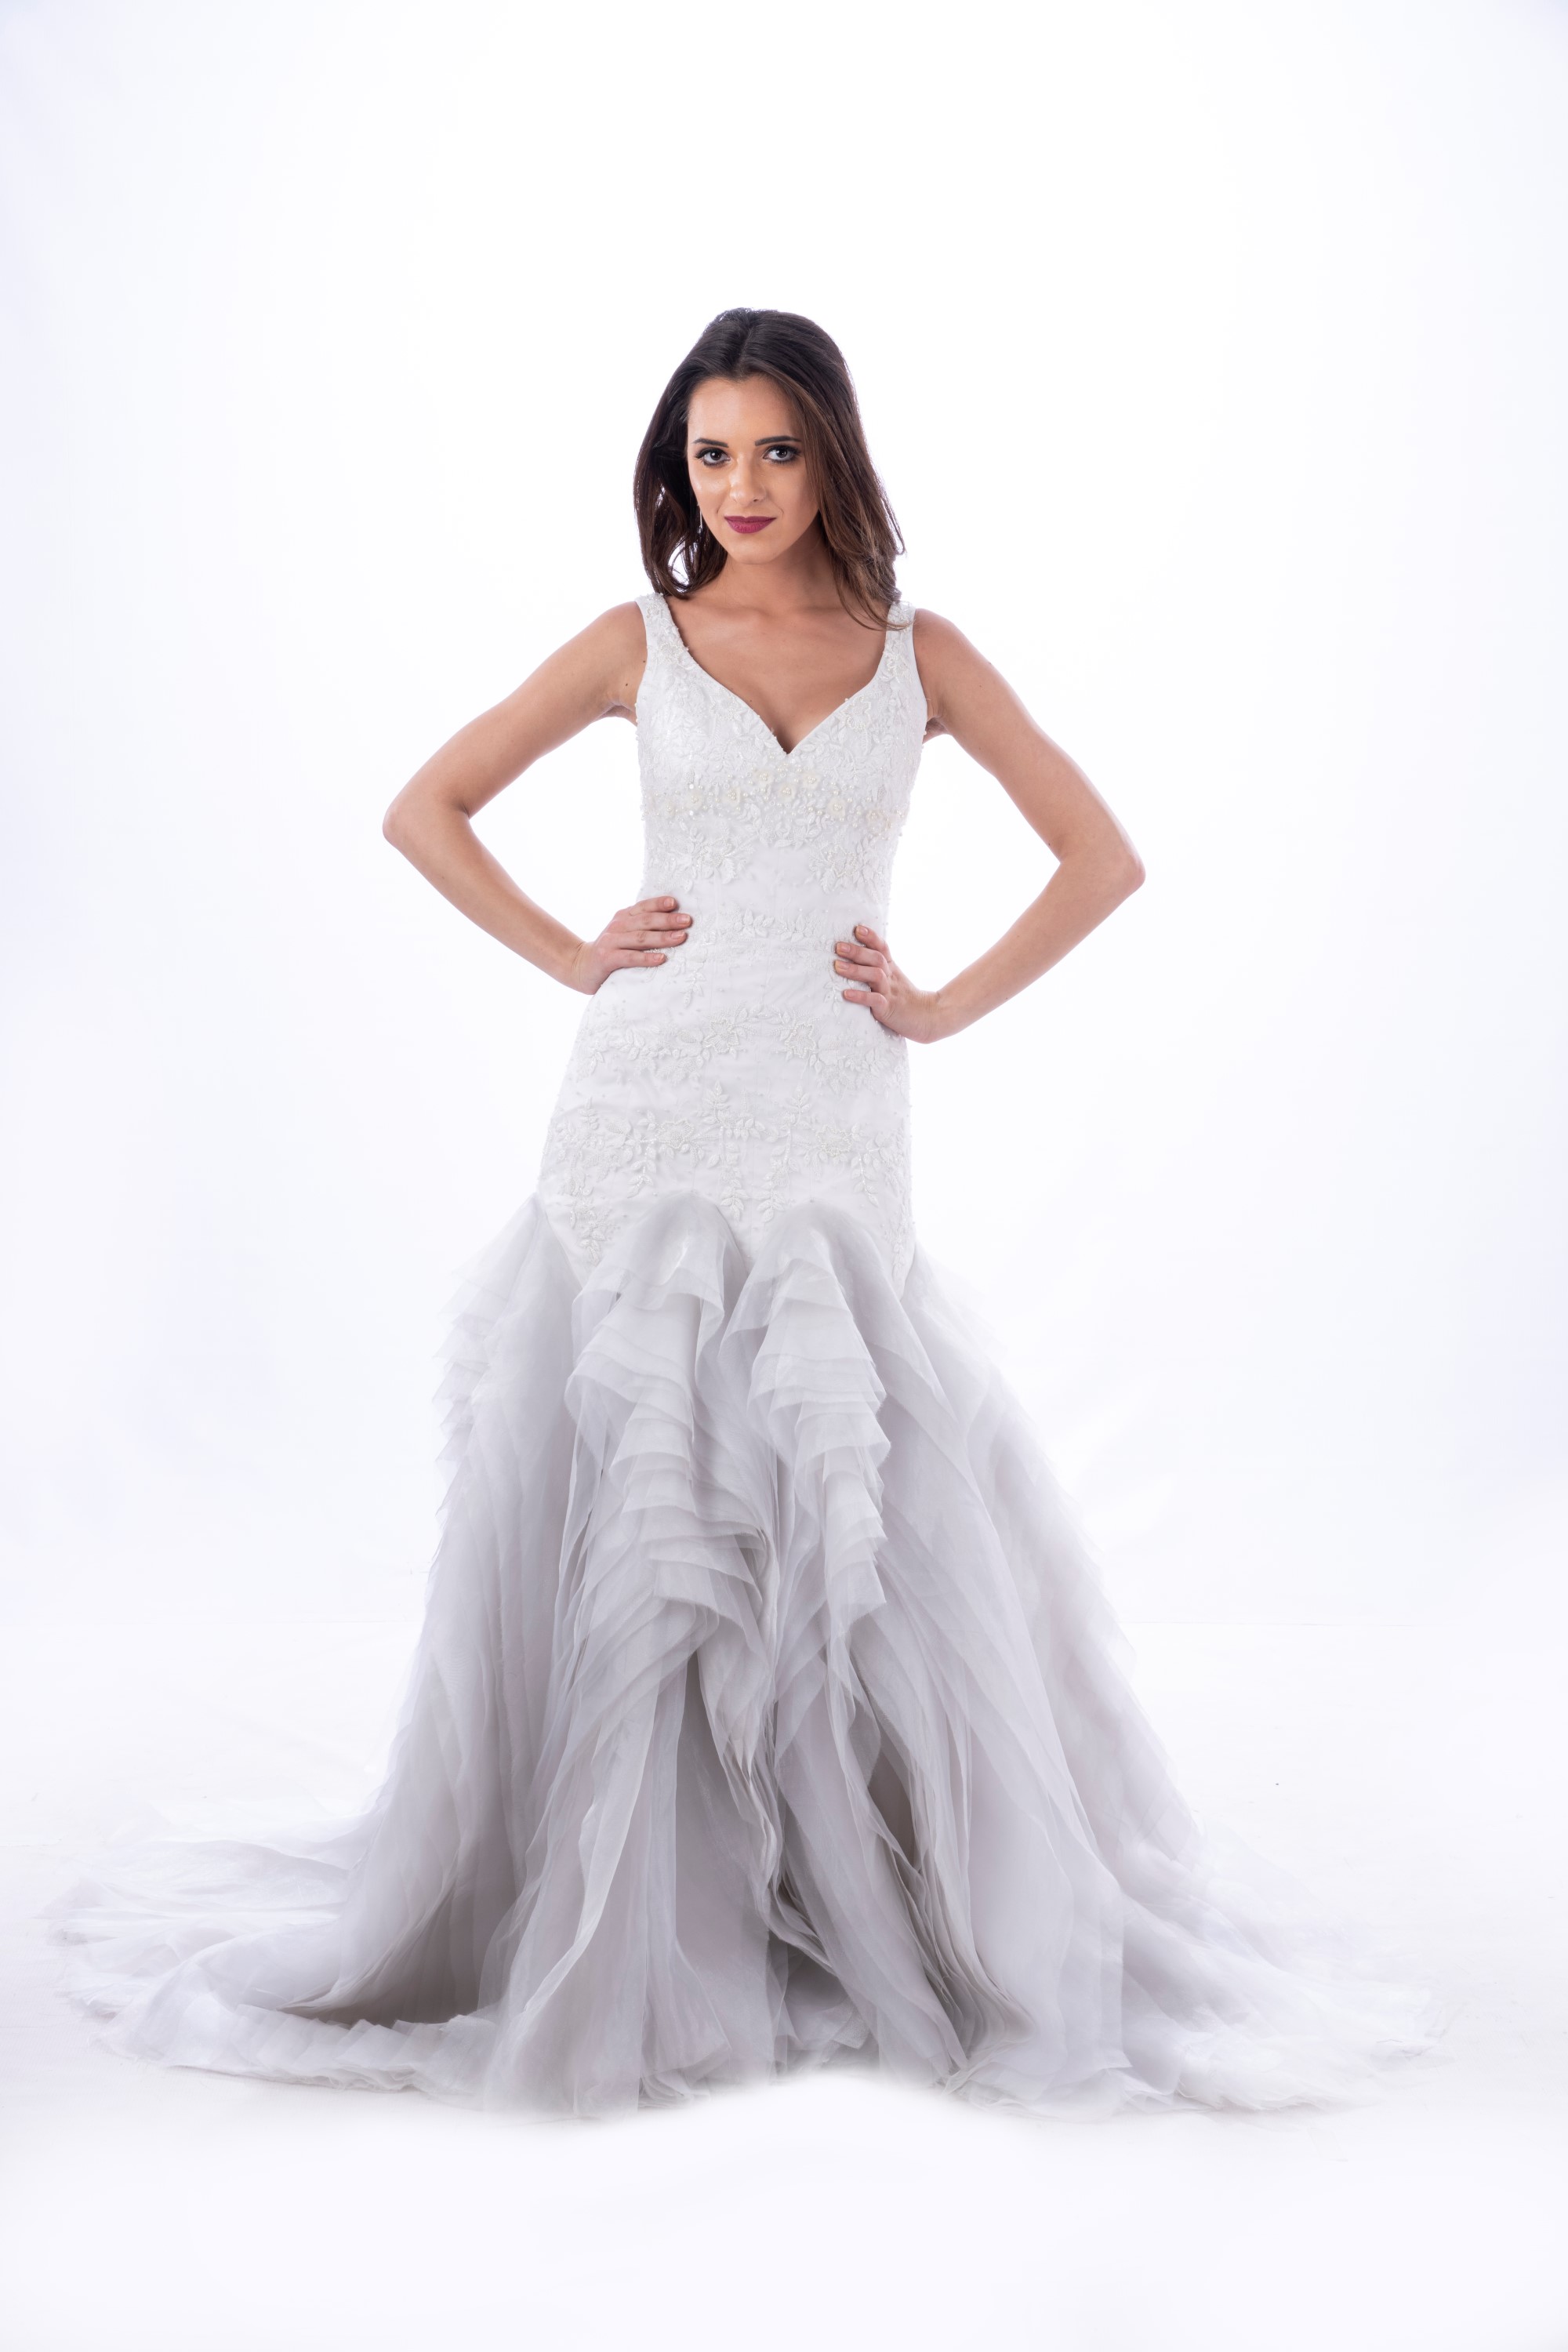 TIPS FOR Deciding On YOUR WEDDING DRESS